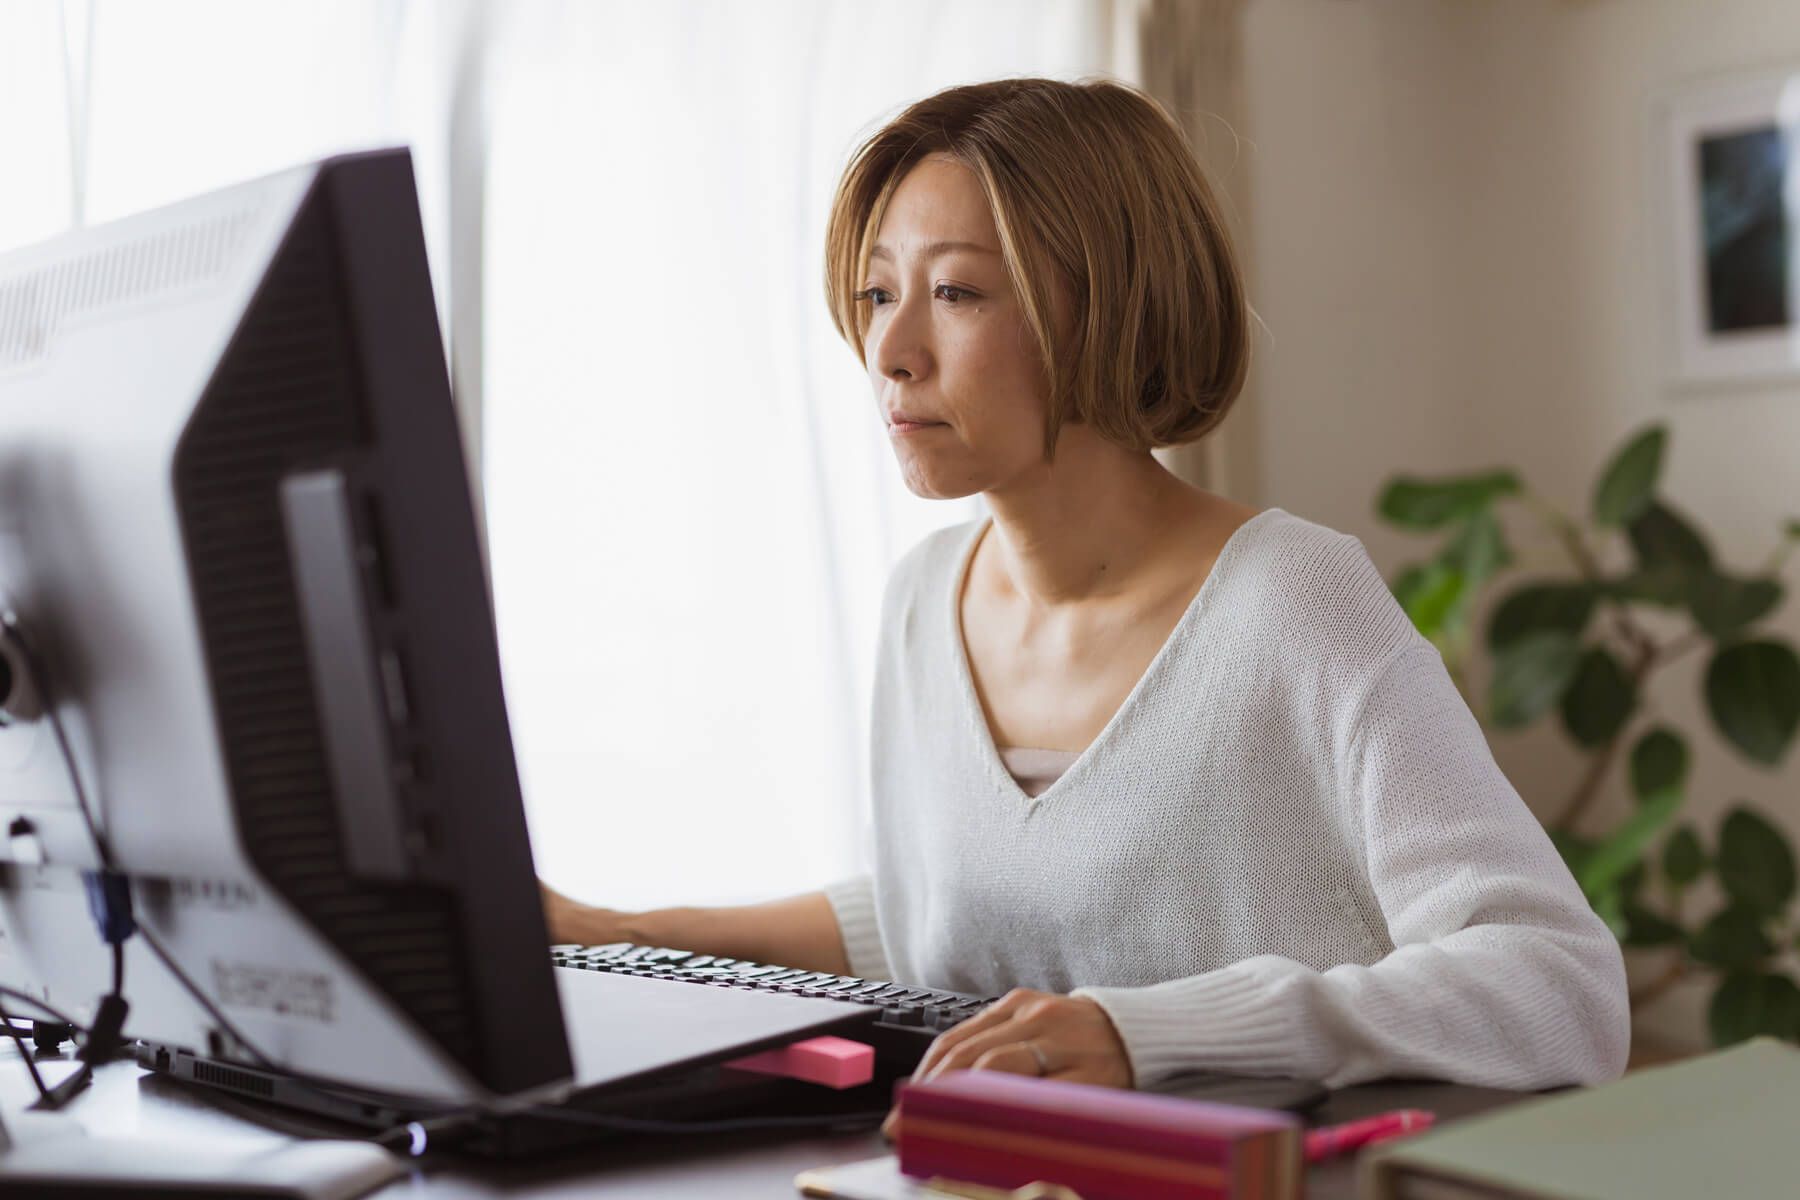 A person concentrates on their desktop while working at home.